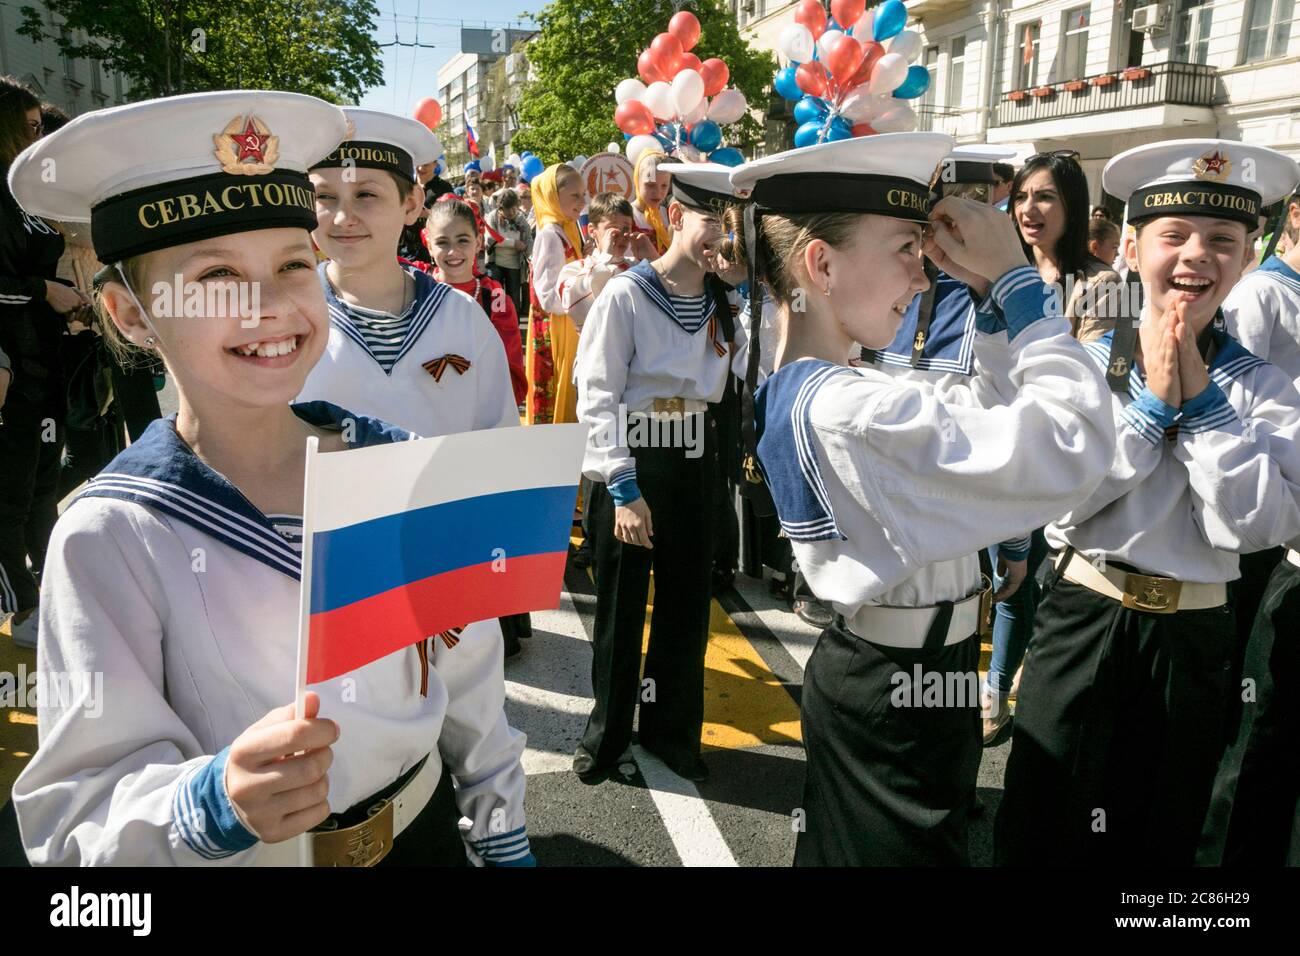 Sevastopol, Crimea, 1st of May, 2017 Participants of the May Day march in the uniform of soviet sailors to mark the International Workers' Solidarity Day on the main street of Sevastopol city, Crimea Stock Photo